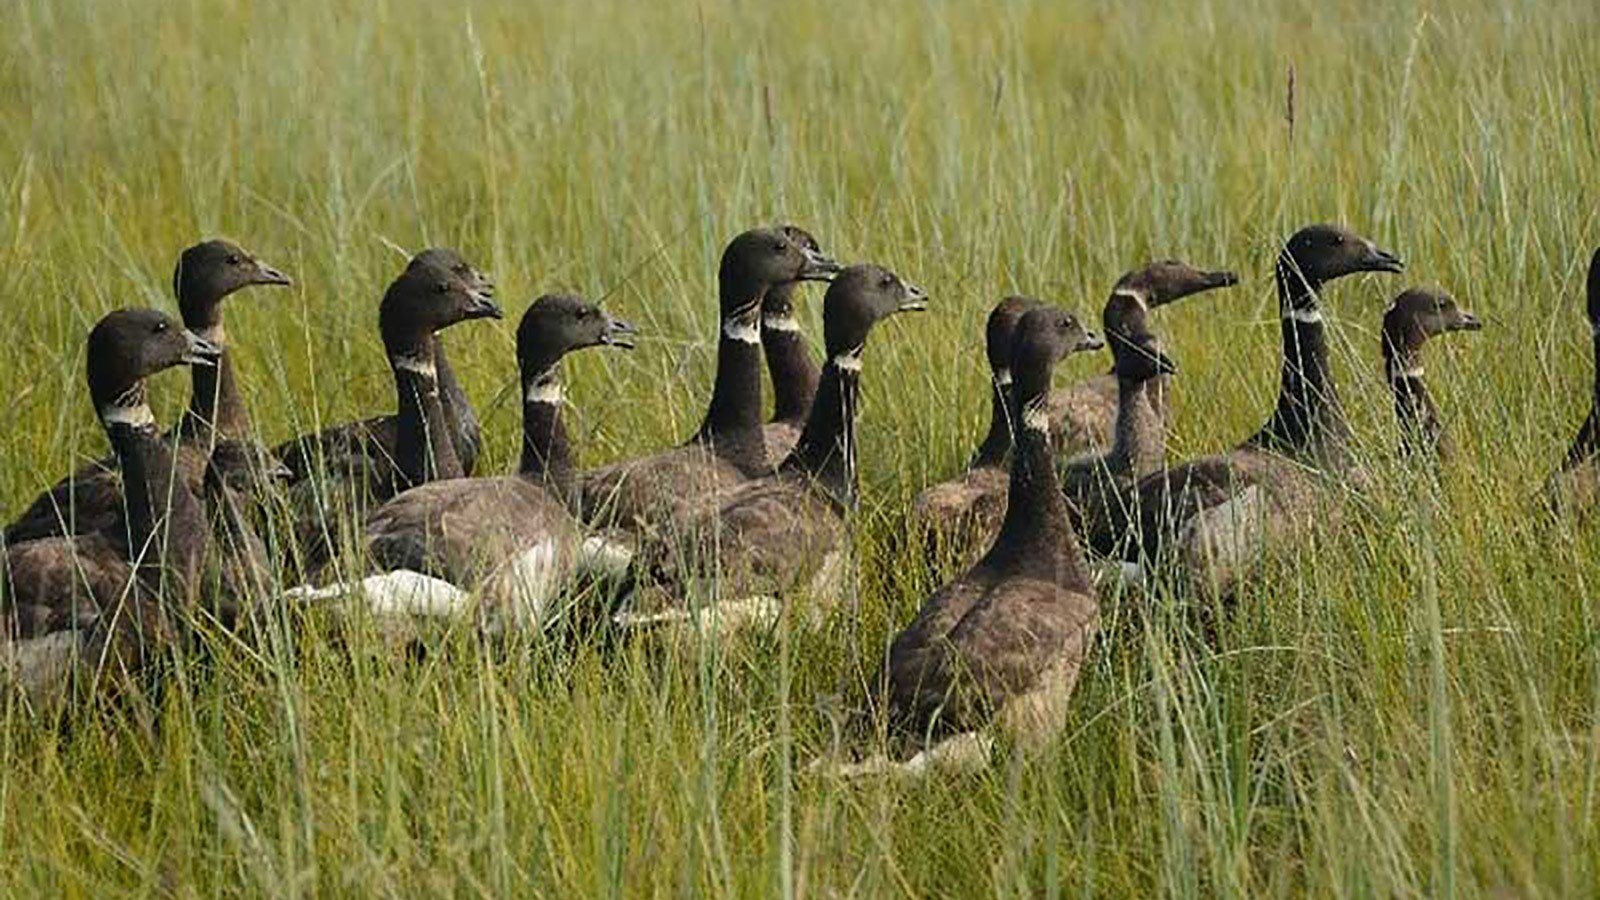 Geese in the grass.